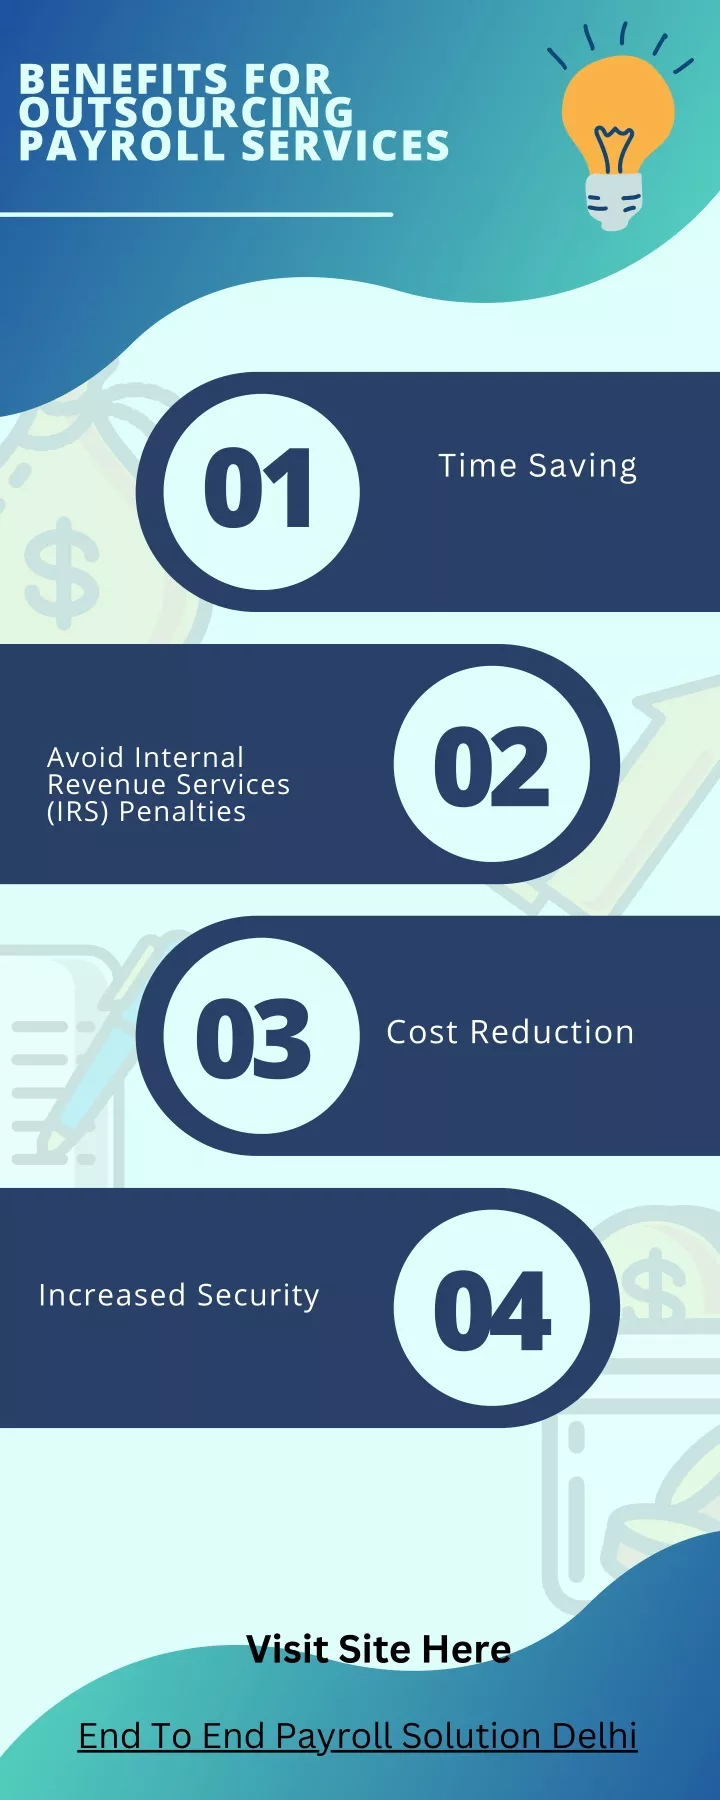 benefits for outsourcing payroll services